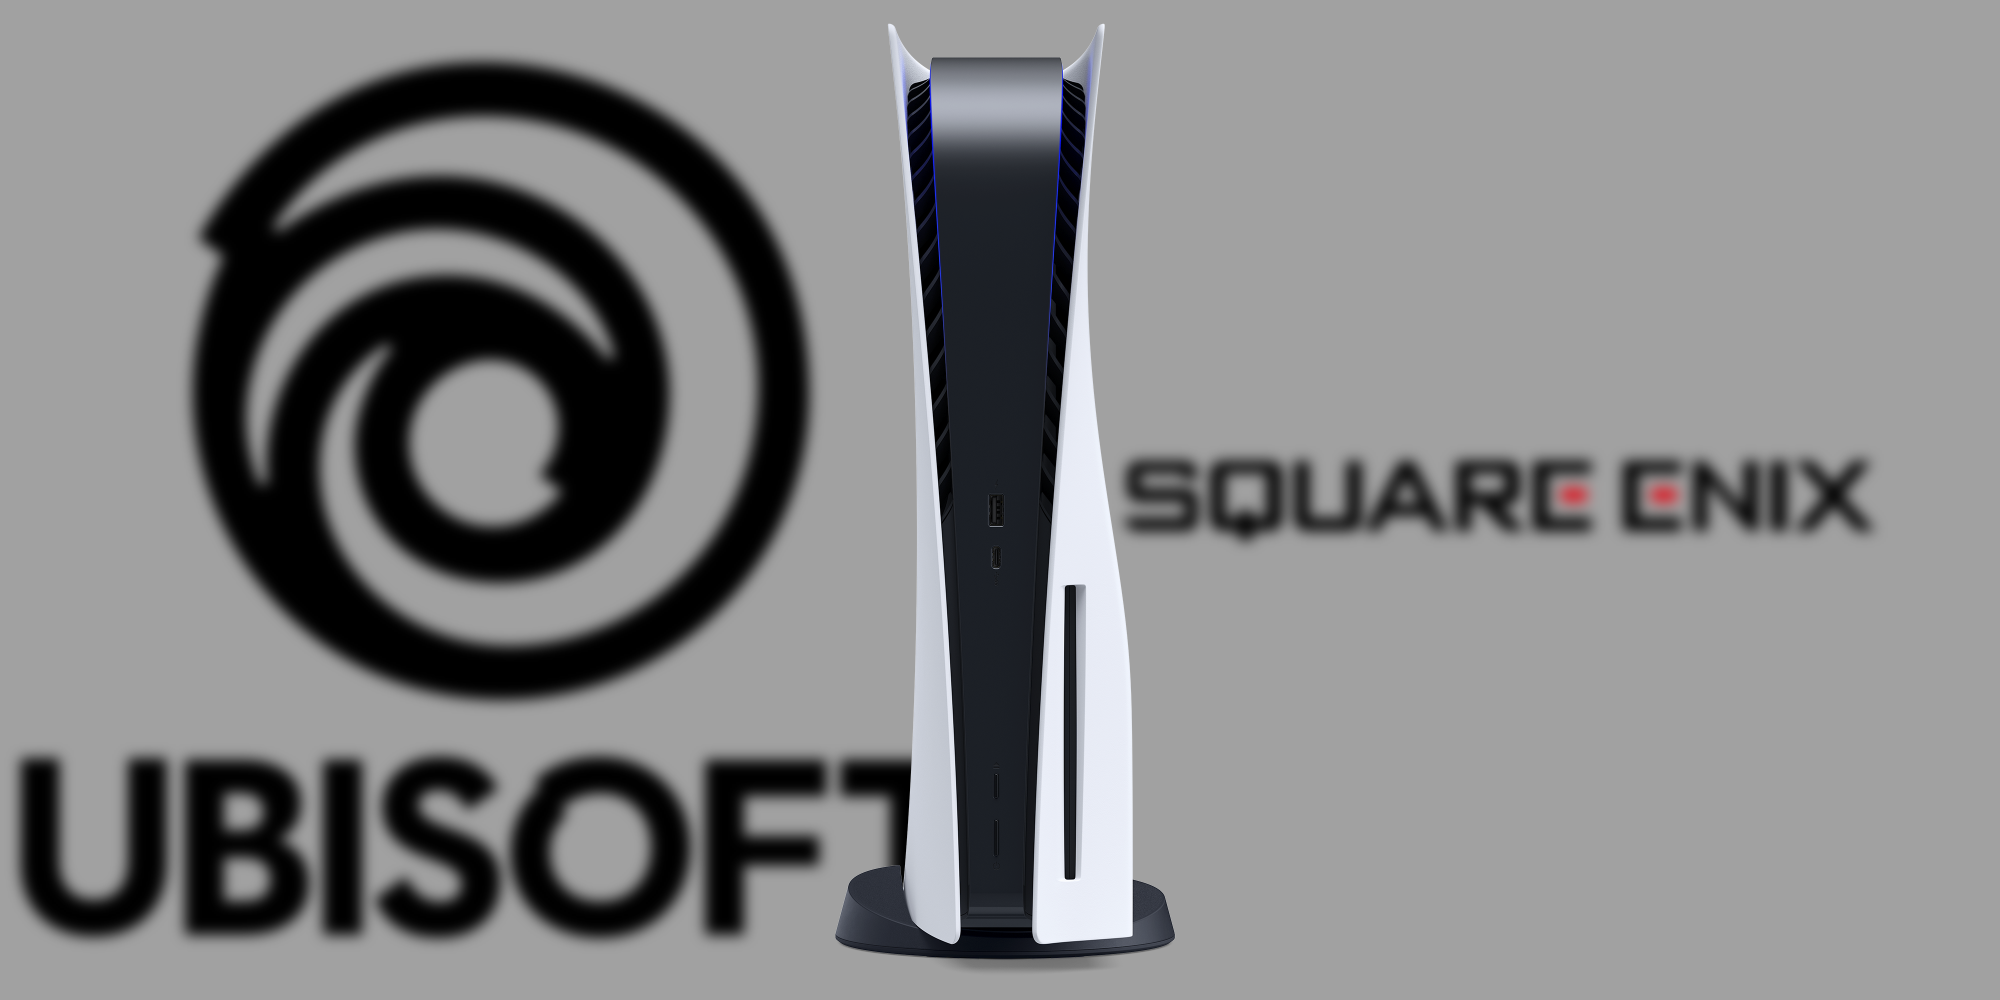 ps5 with blurred ubisoft and square enix logos